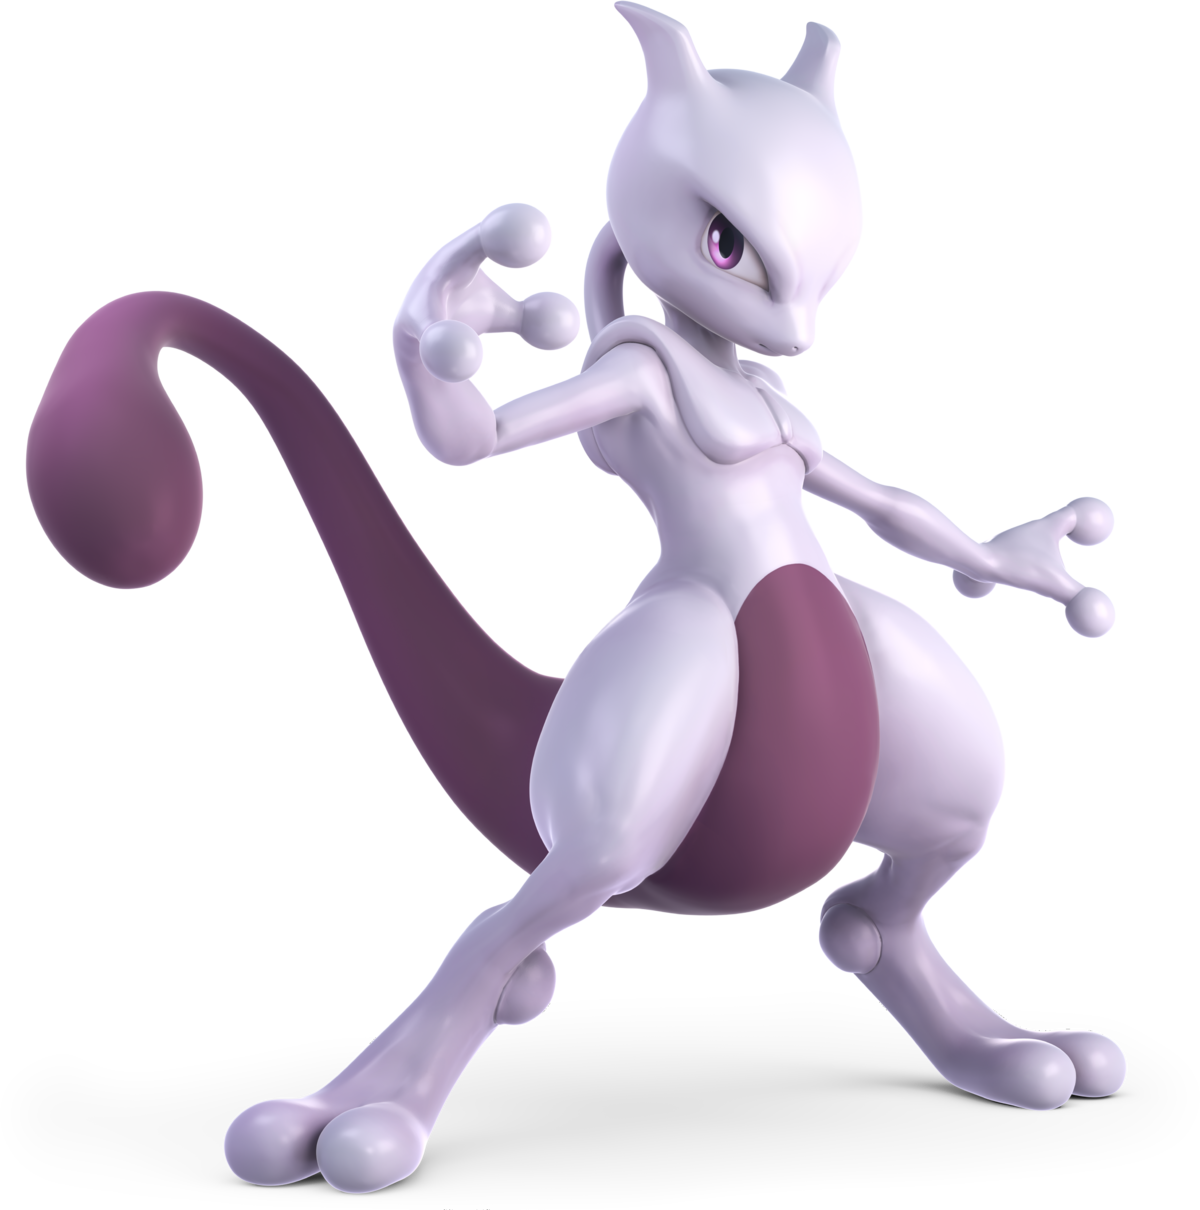 How To Unlock Mewtwo In Super Smash Bros Ultimate